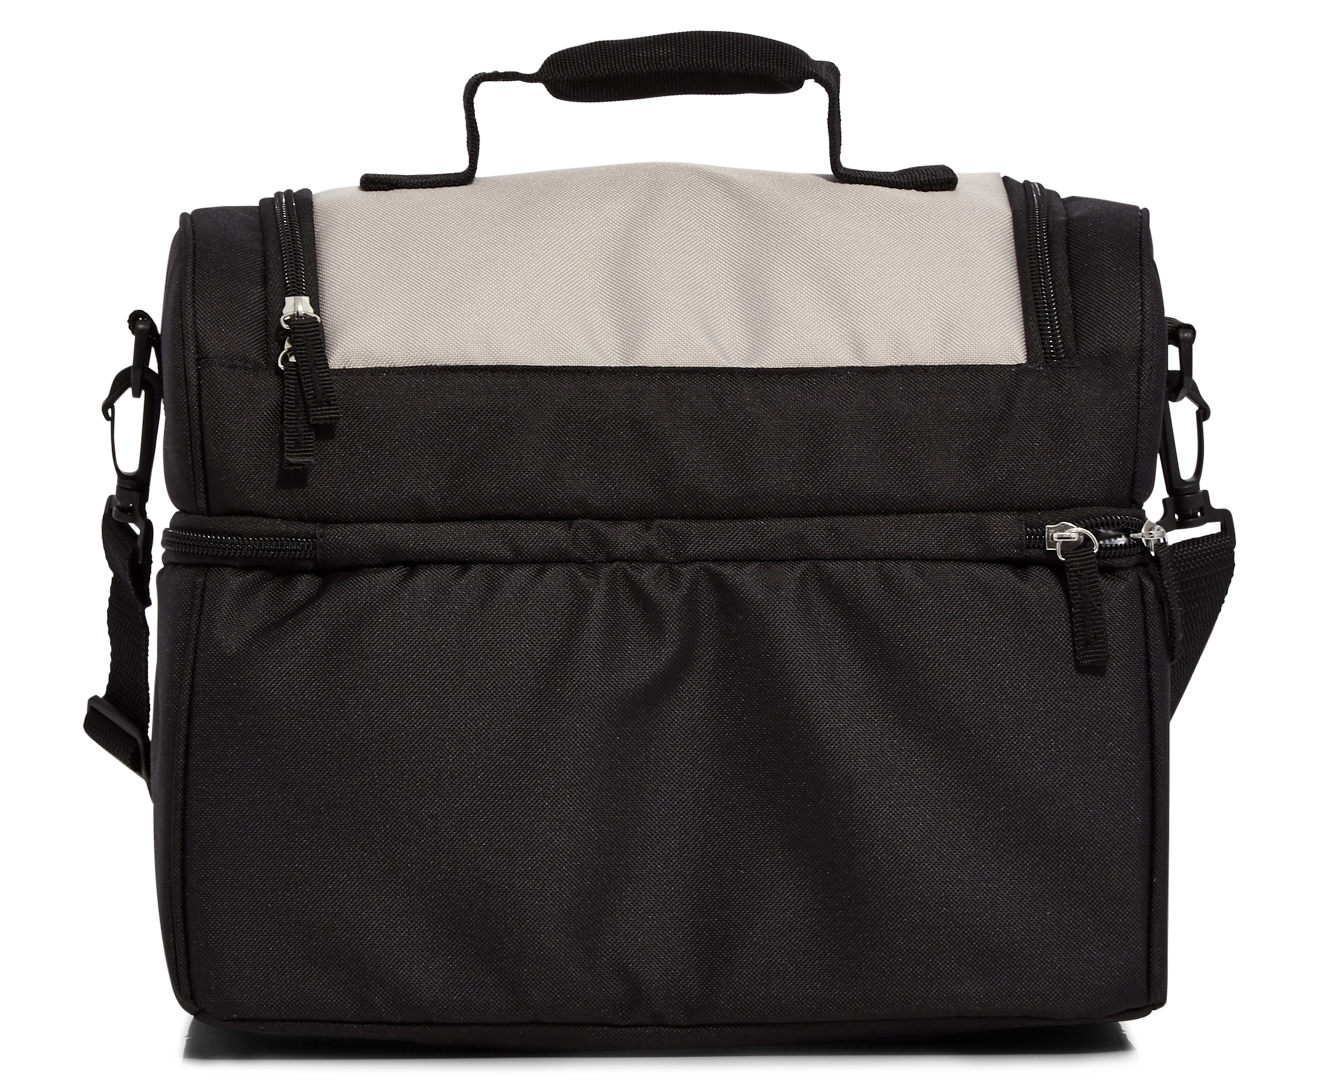 Thermos Dual Compartment Lunch Lugger Bag - Grey/Black | Catch.co.nz